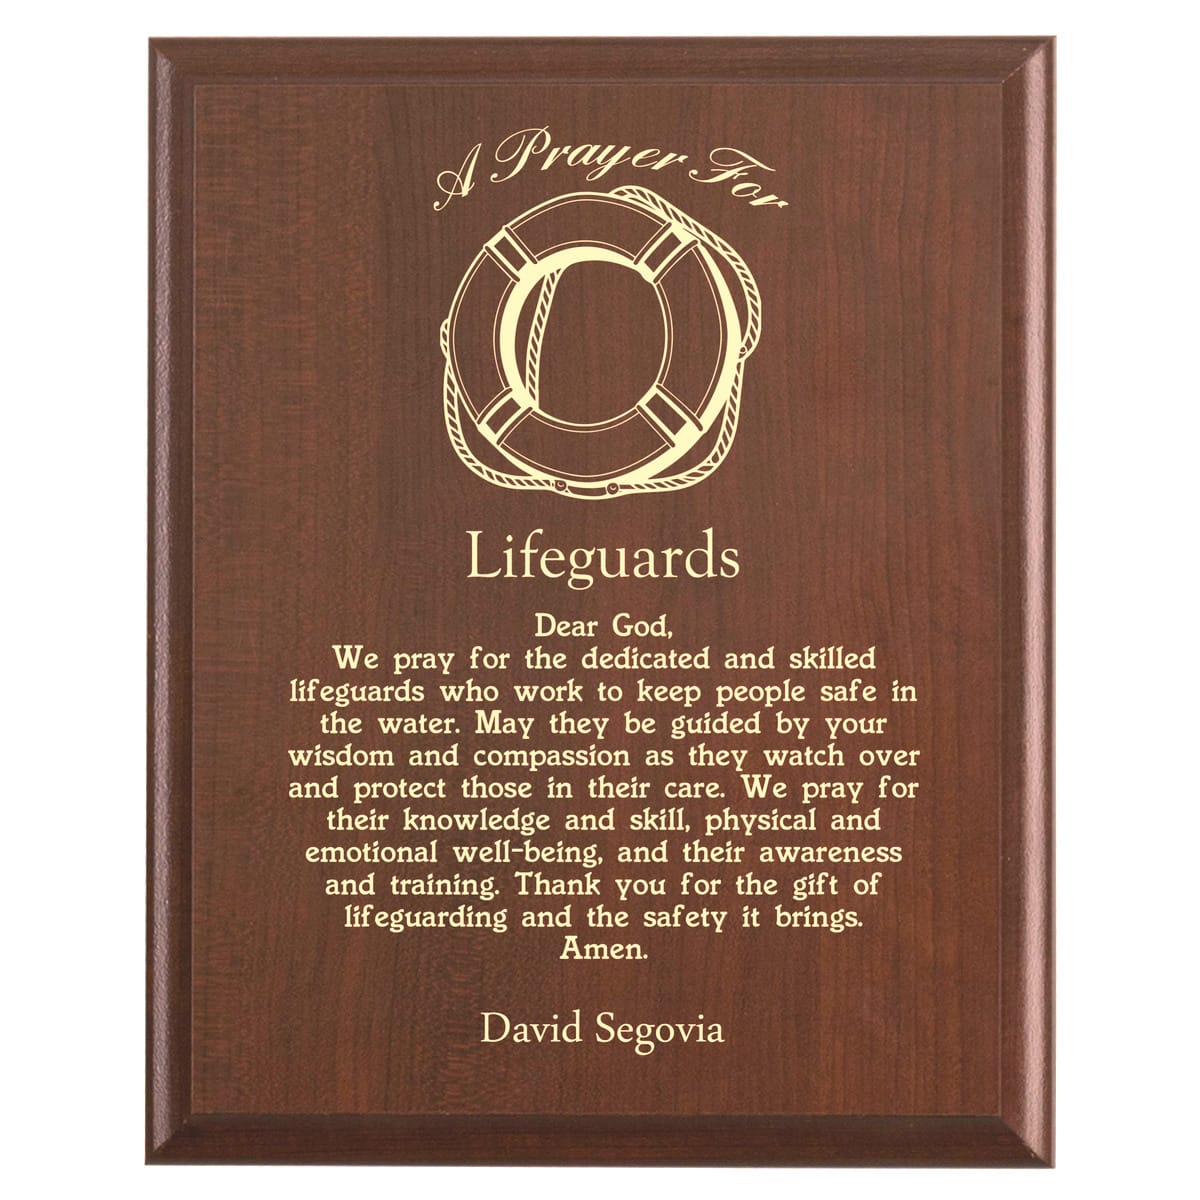 Plaque photo: Lifeguard Prayer Plaque design with free personalization. Wood style finish with customized text.